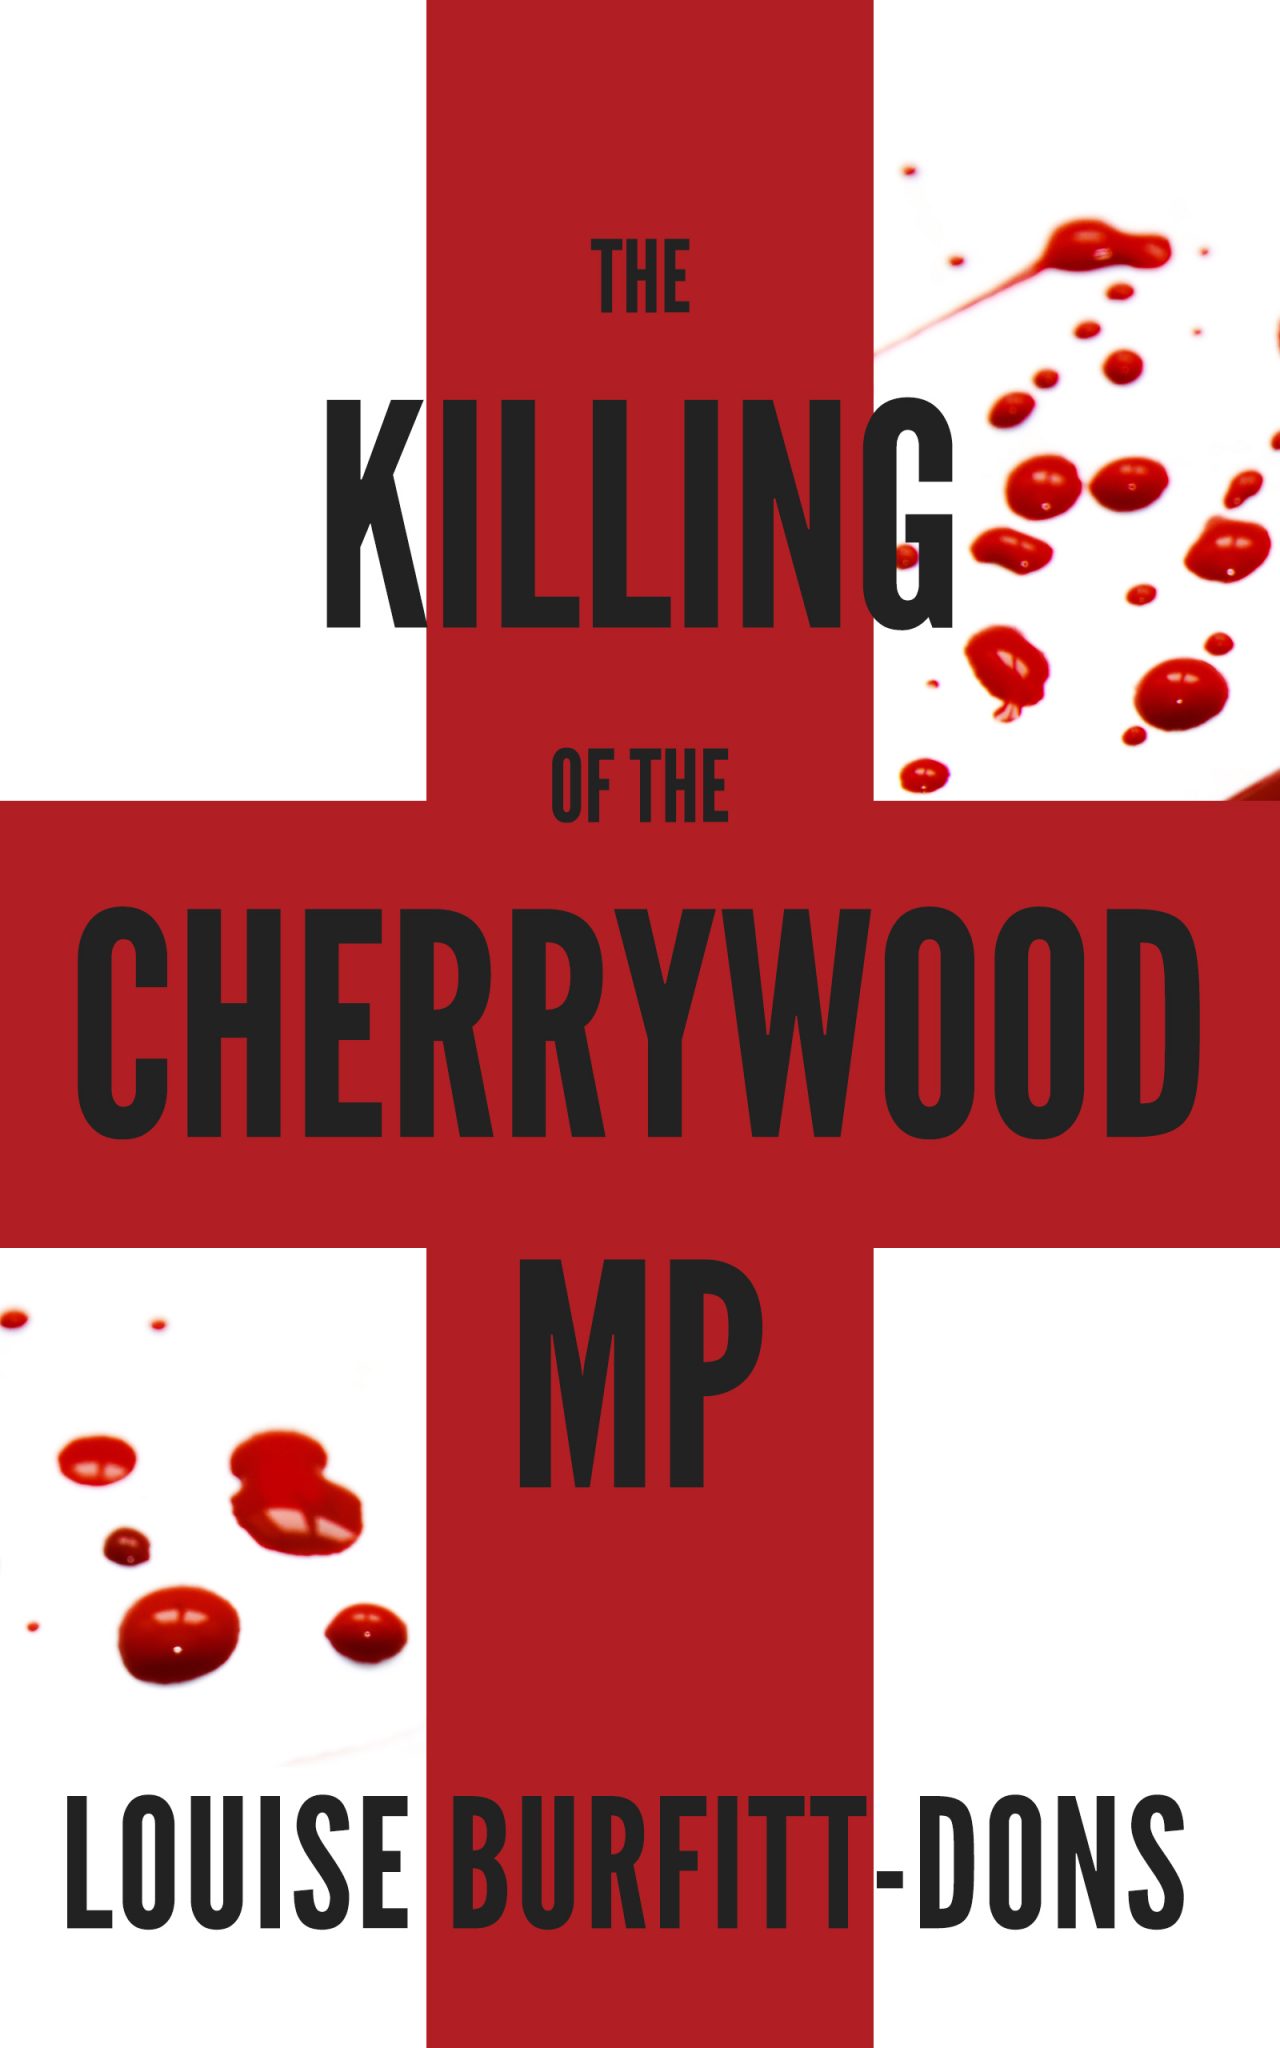 The Killing of the Cherrywood MP by Louise Burfitt-Dons